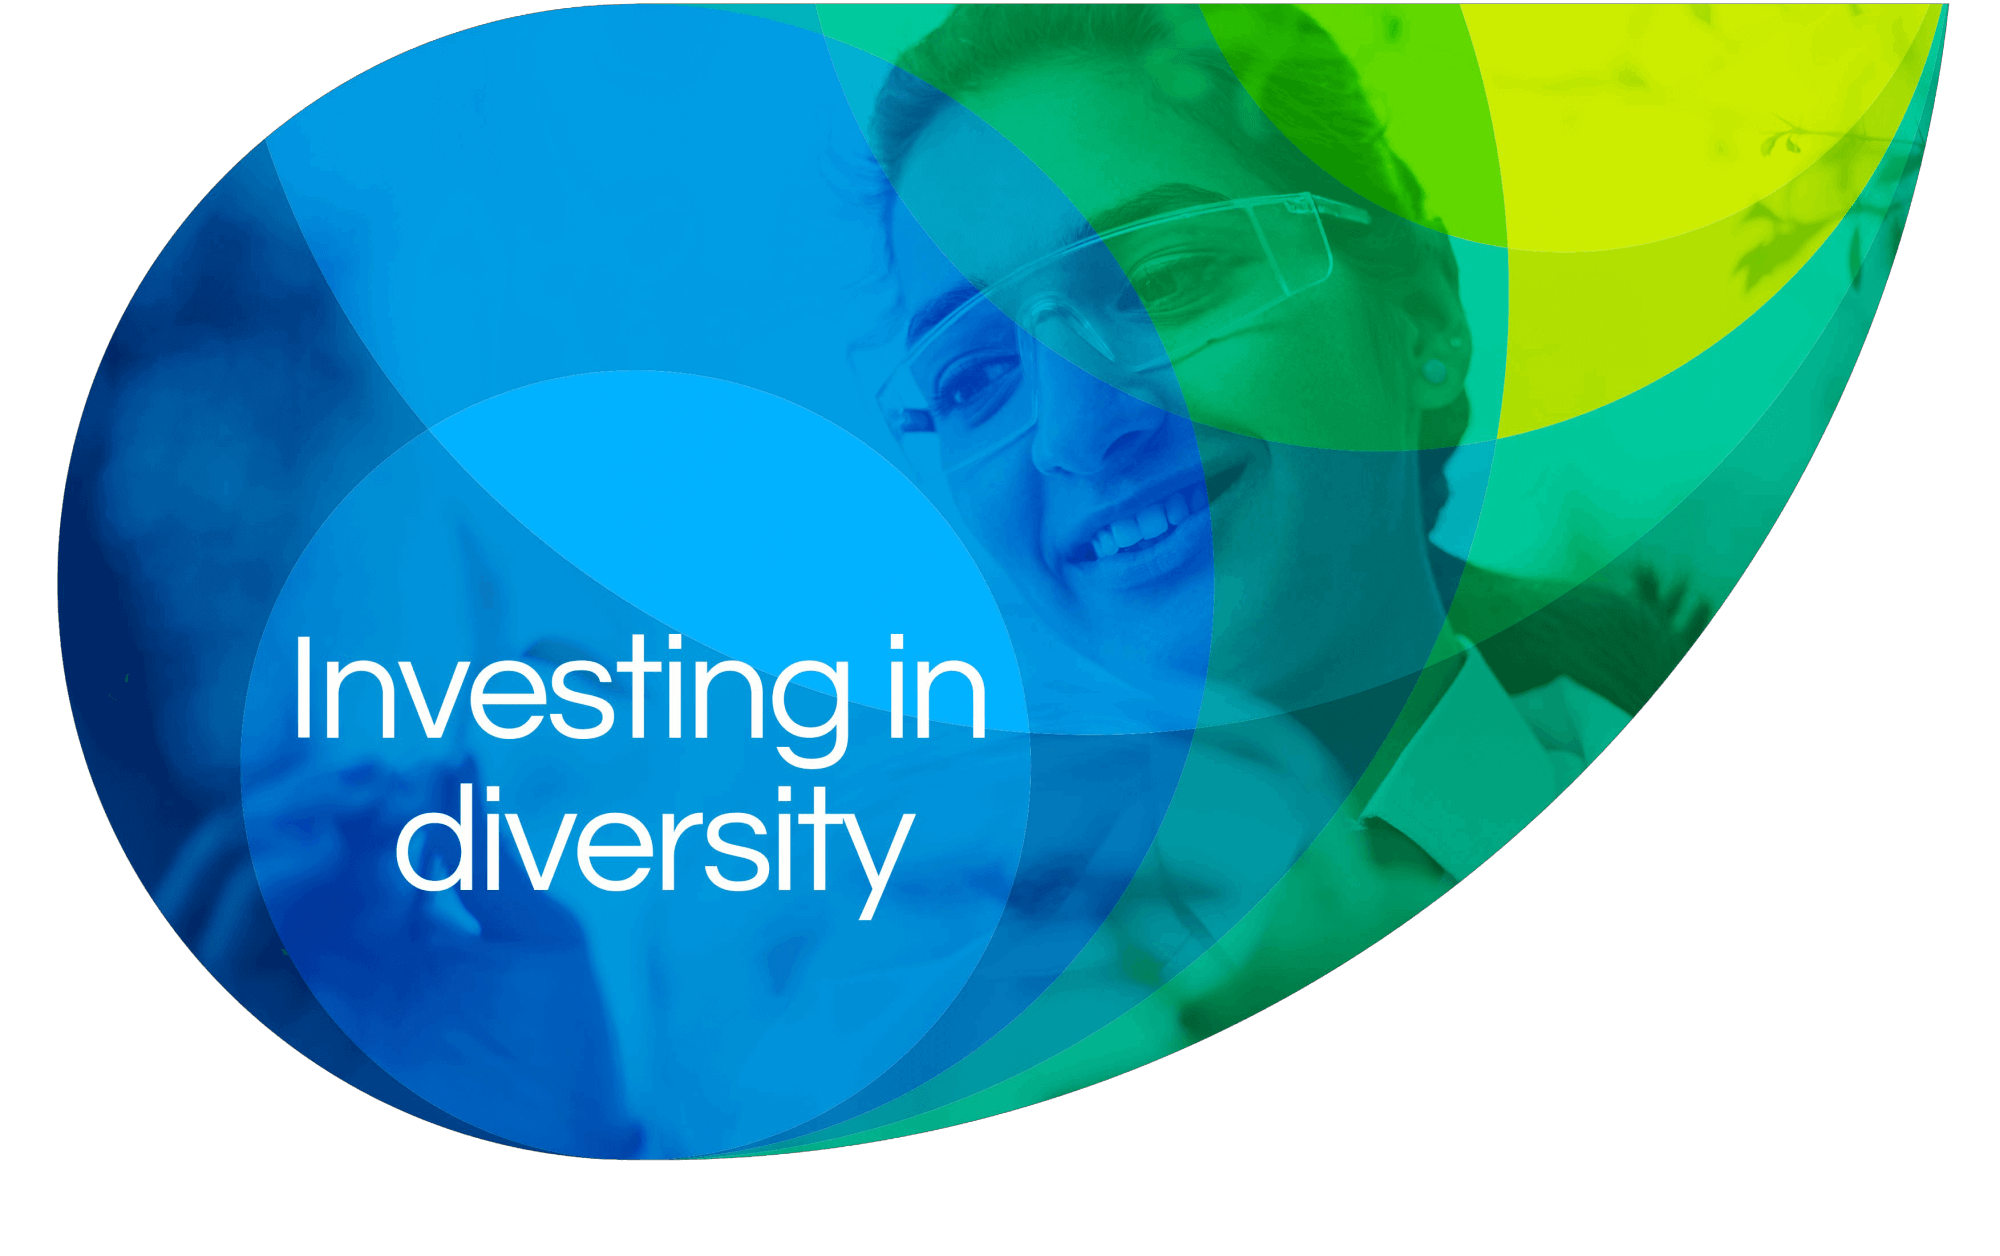 Investing in diversity - We created Sweef Capital to invest in the potential of women and the future of Southeast Asia